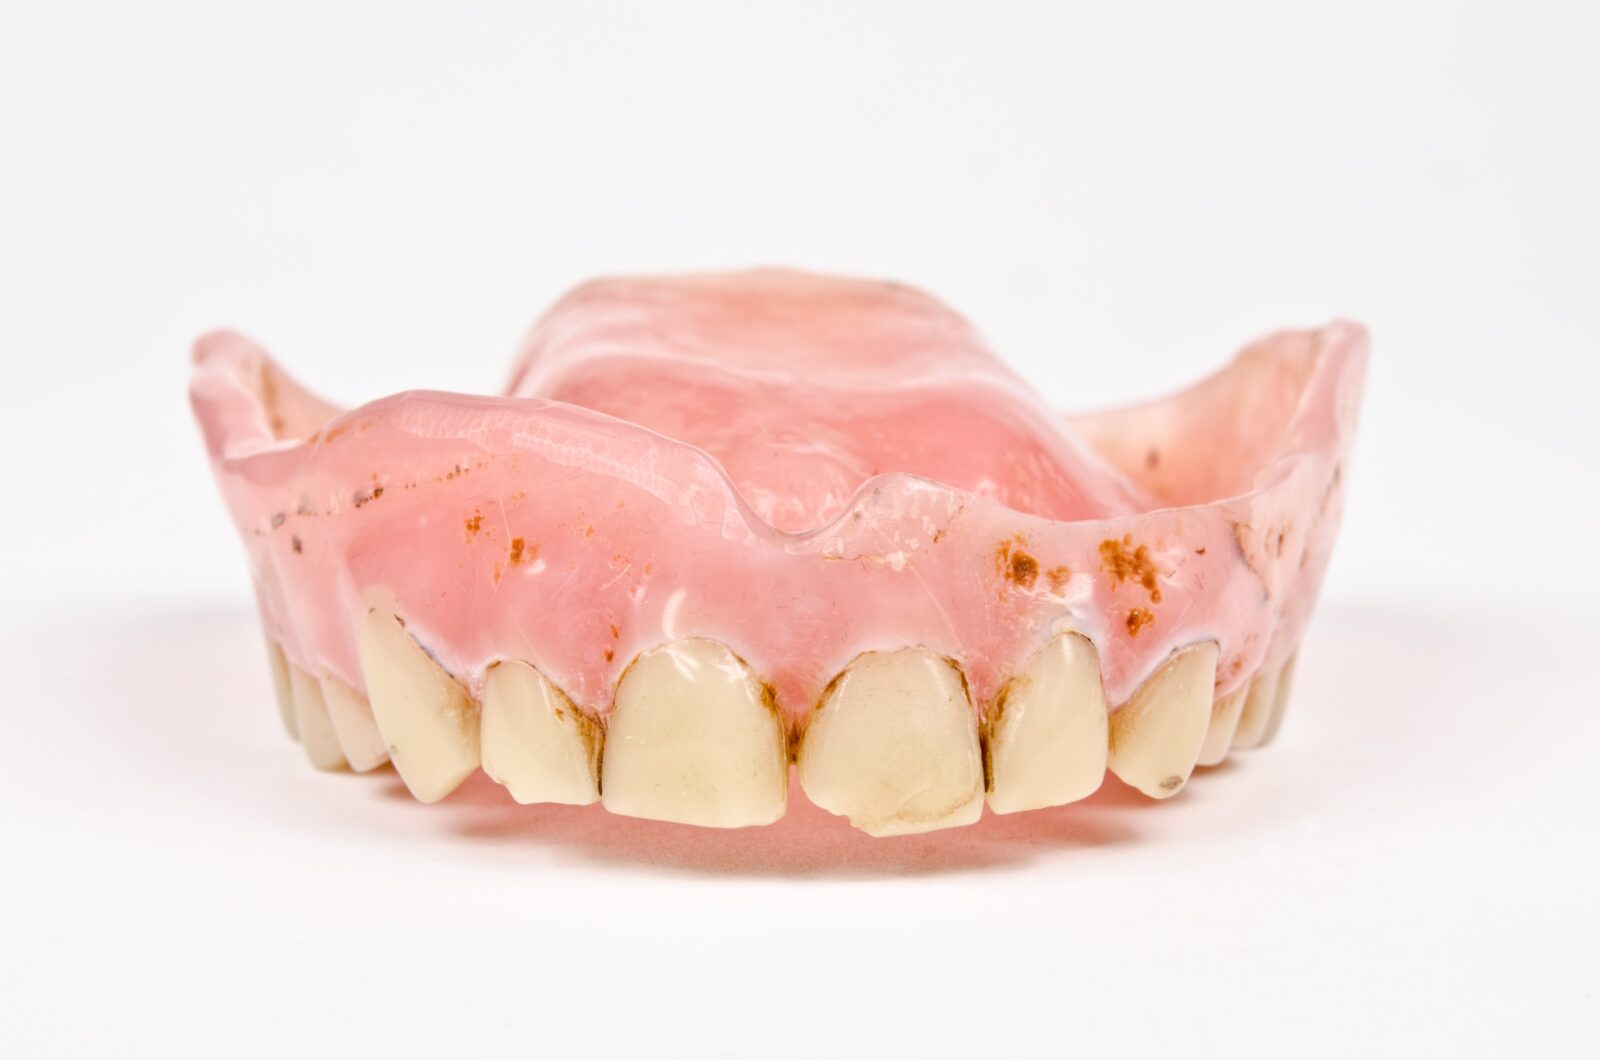 stained and worn denture